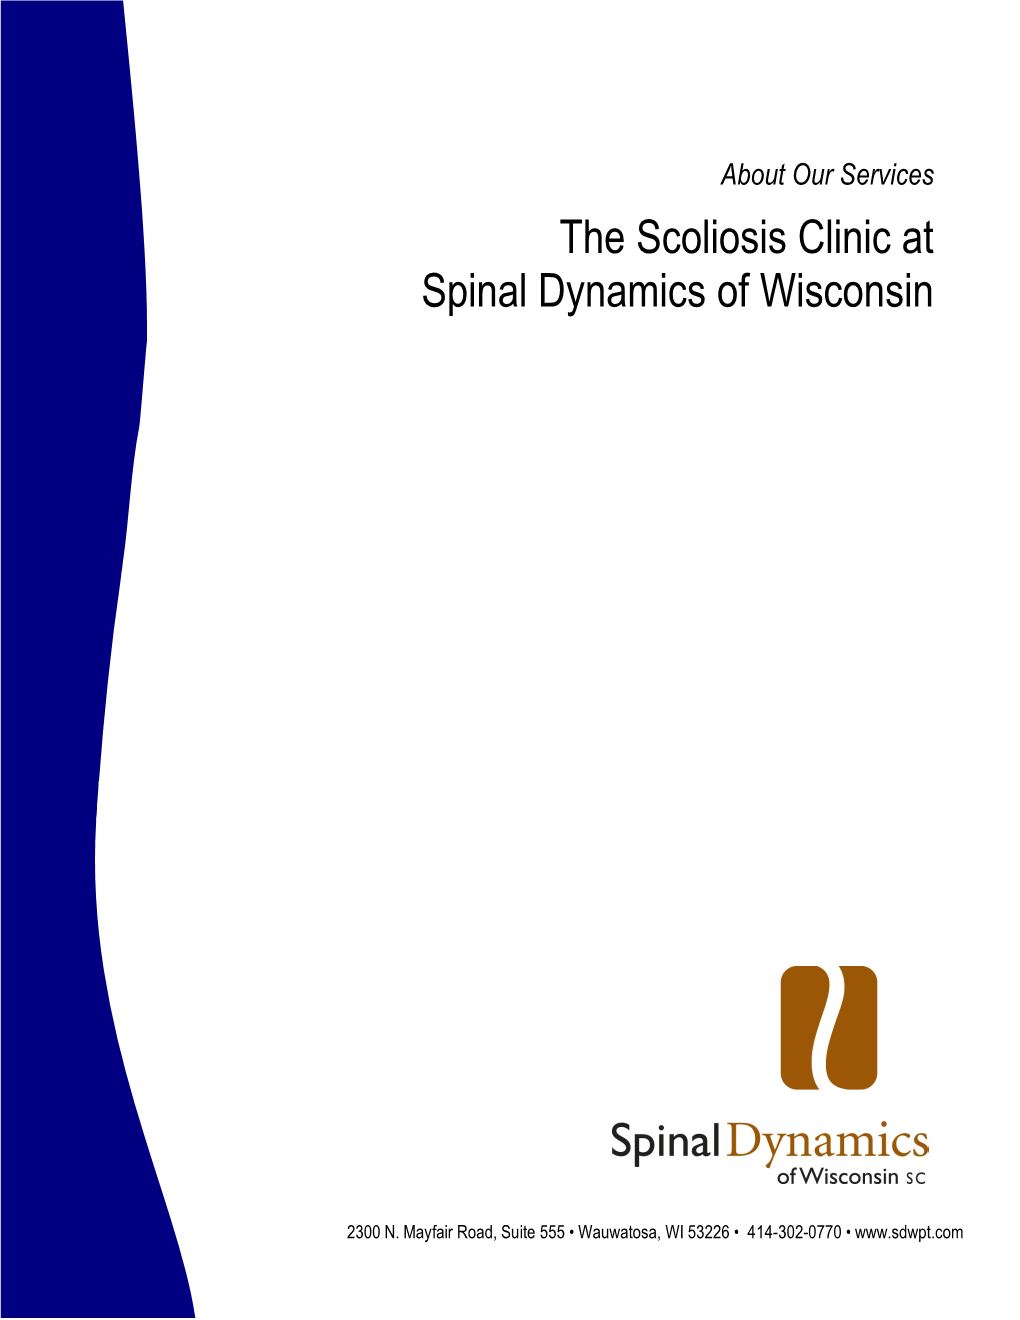 The Scoliosis Clinic at Spinal Dynamics of Wisconsin